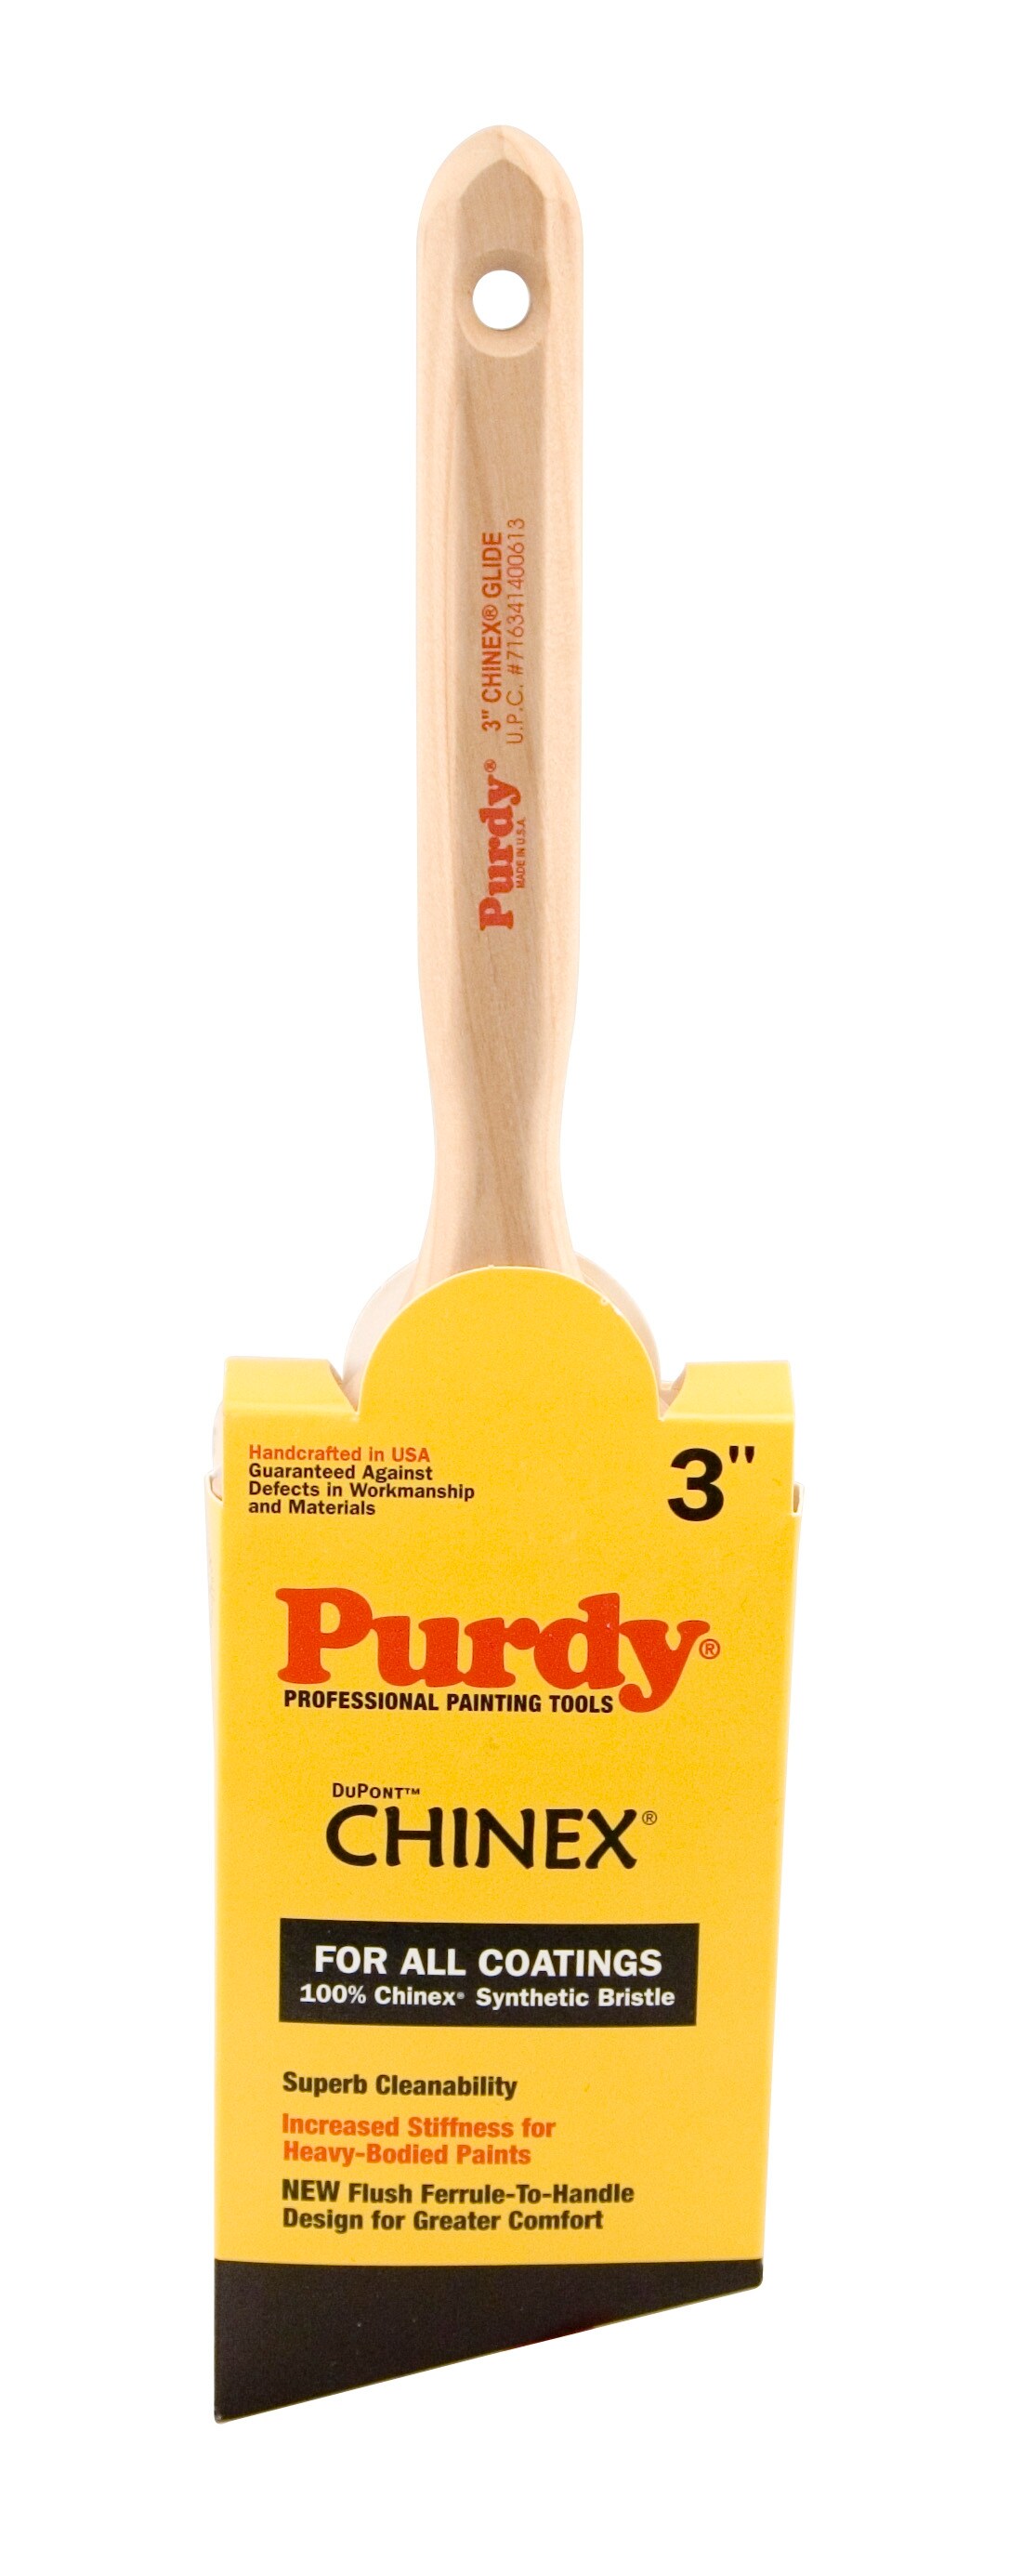 Purdy XL Glide 3-in Reusable Nylon- Polyester Blend Angle Paint